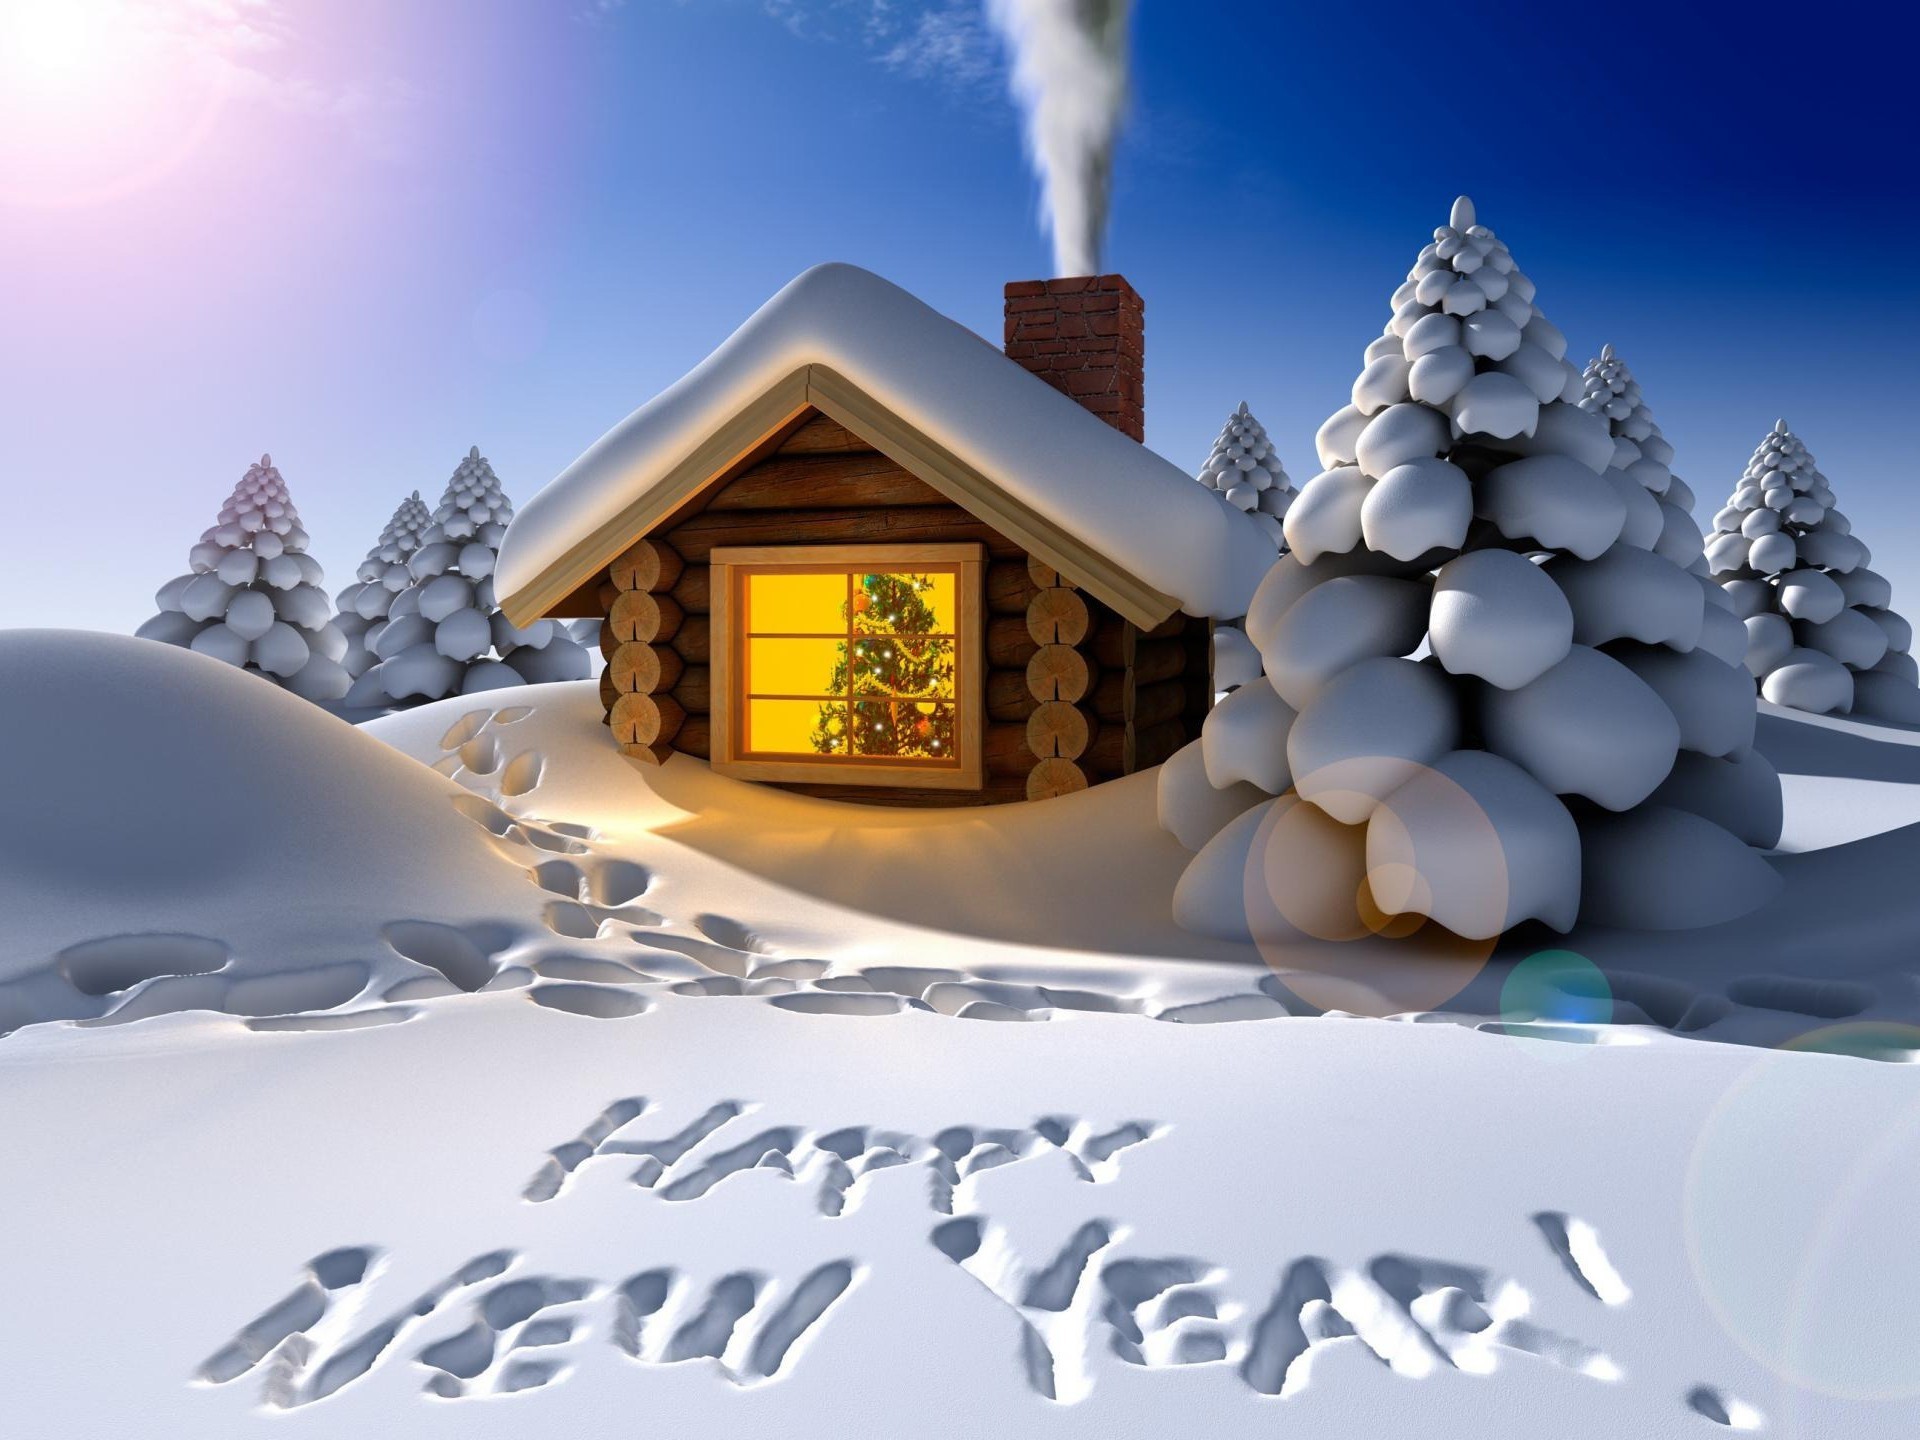 1920x1440 Image: Happy New Year wallpapers and stock photos